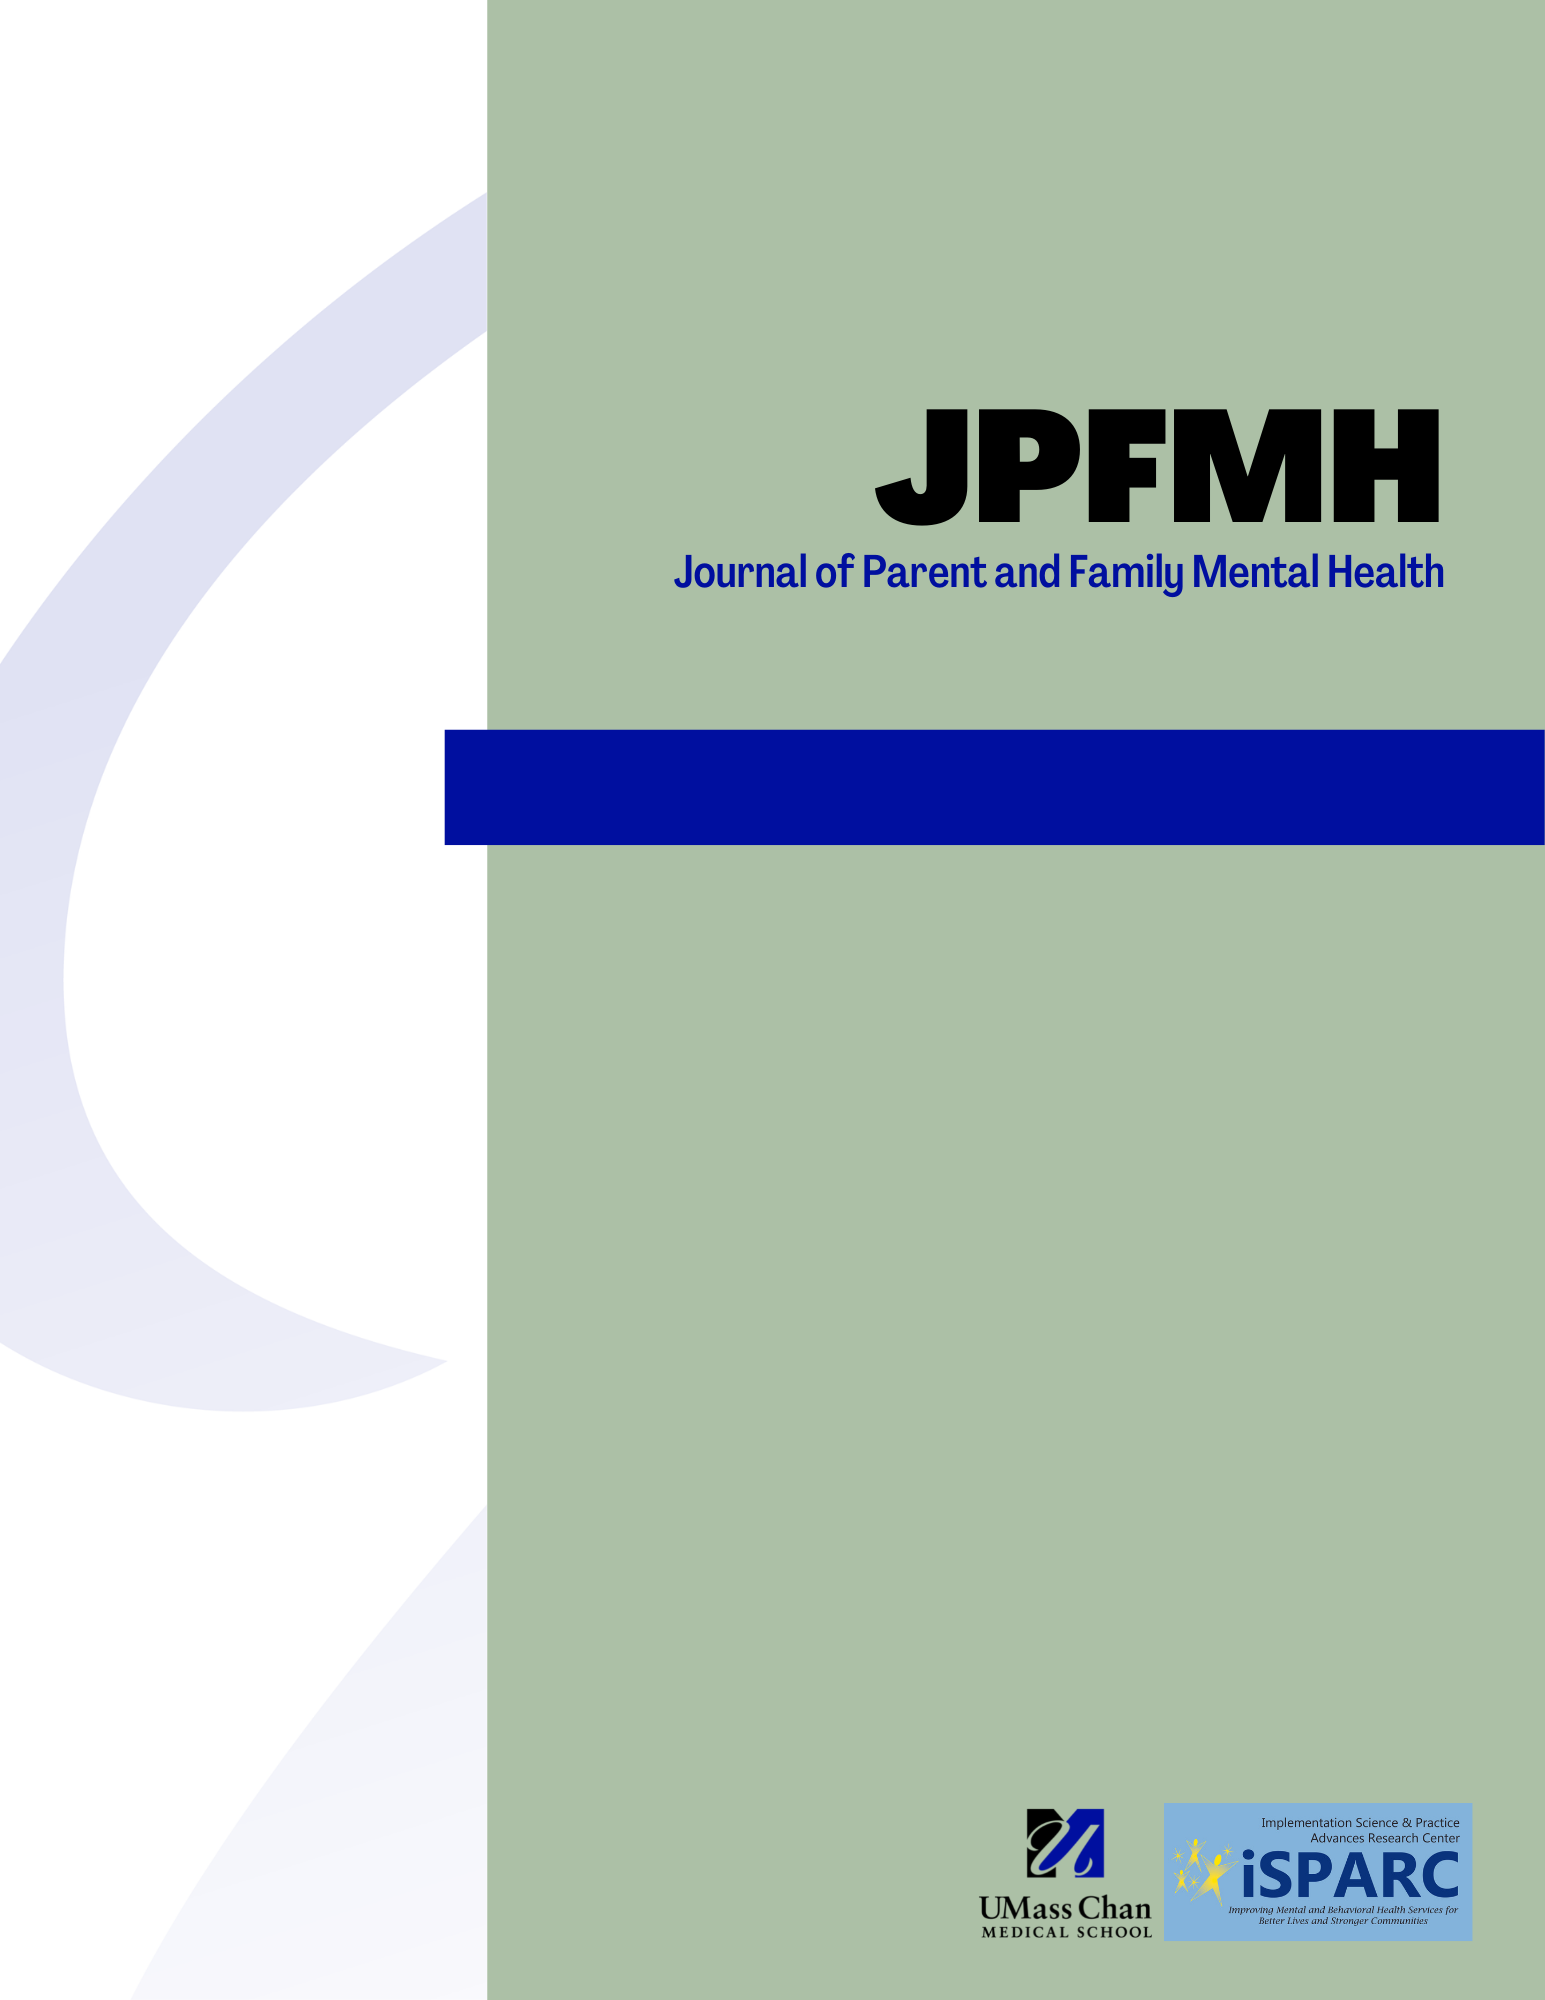 Journal of Parent and Family Mental Health